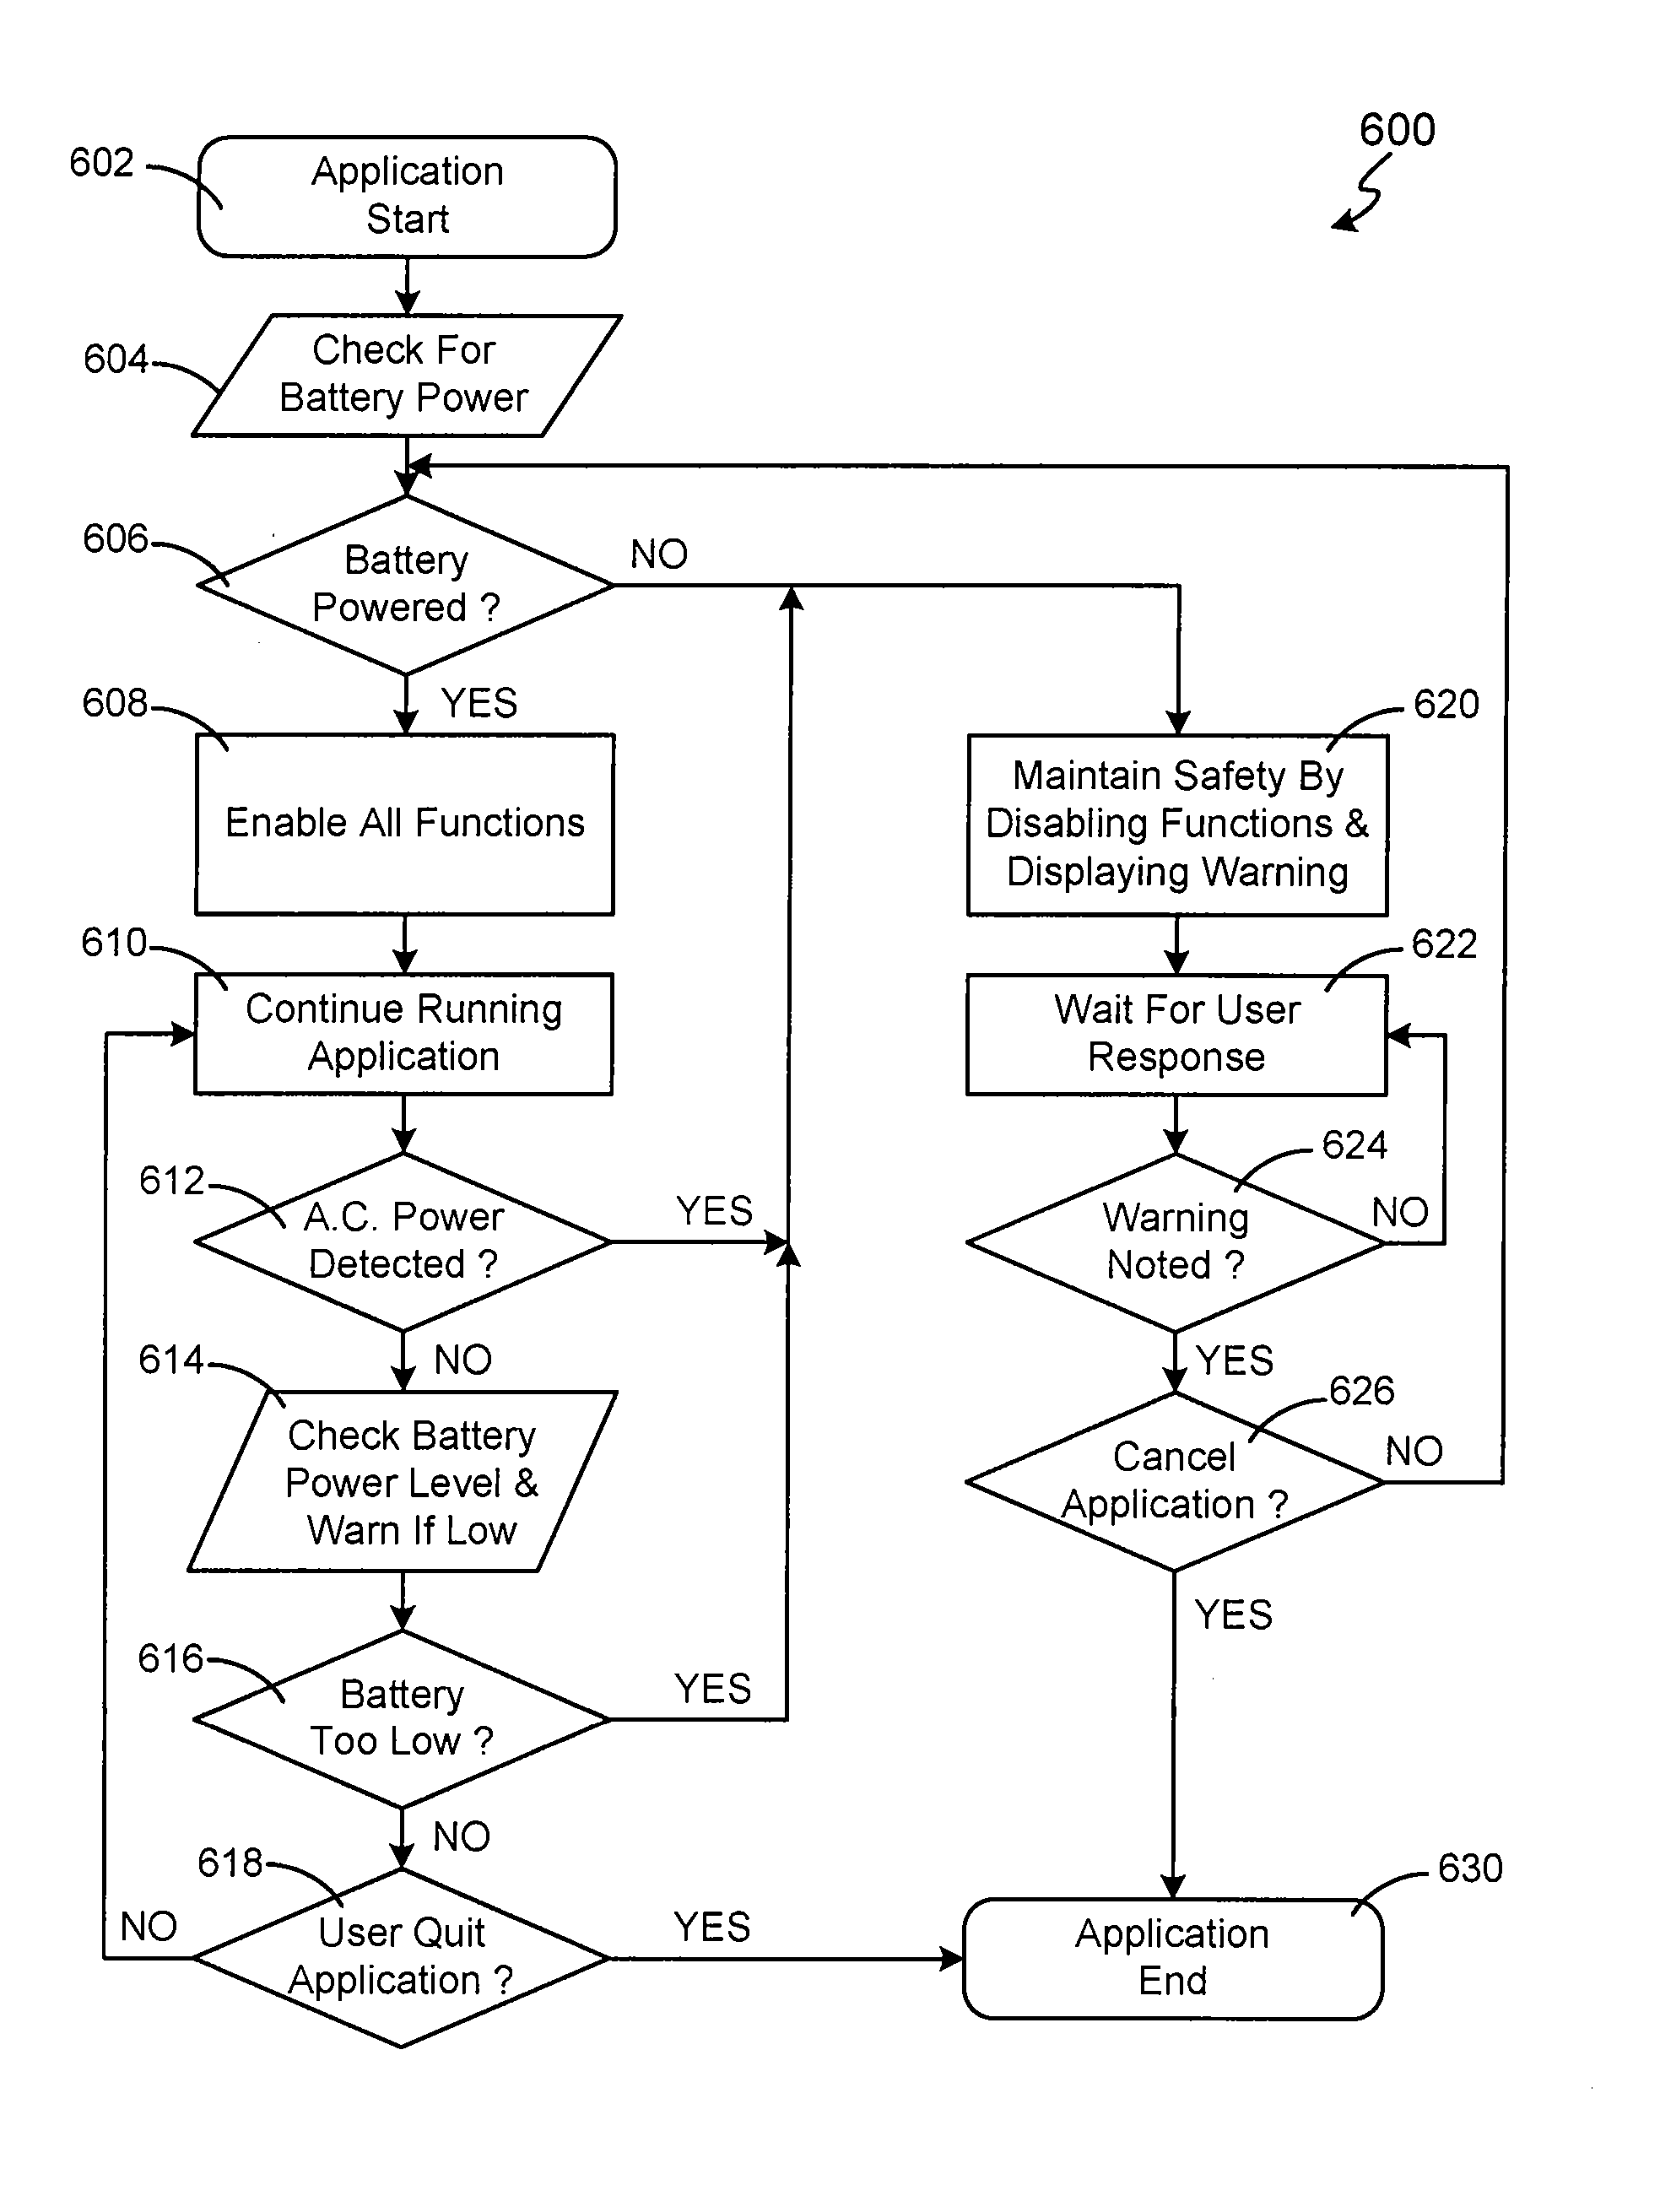 Method and system for enhancing computer peripheral safety